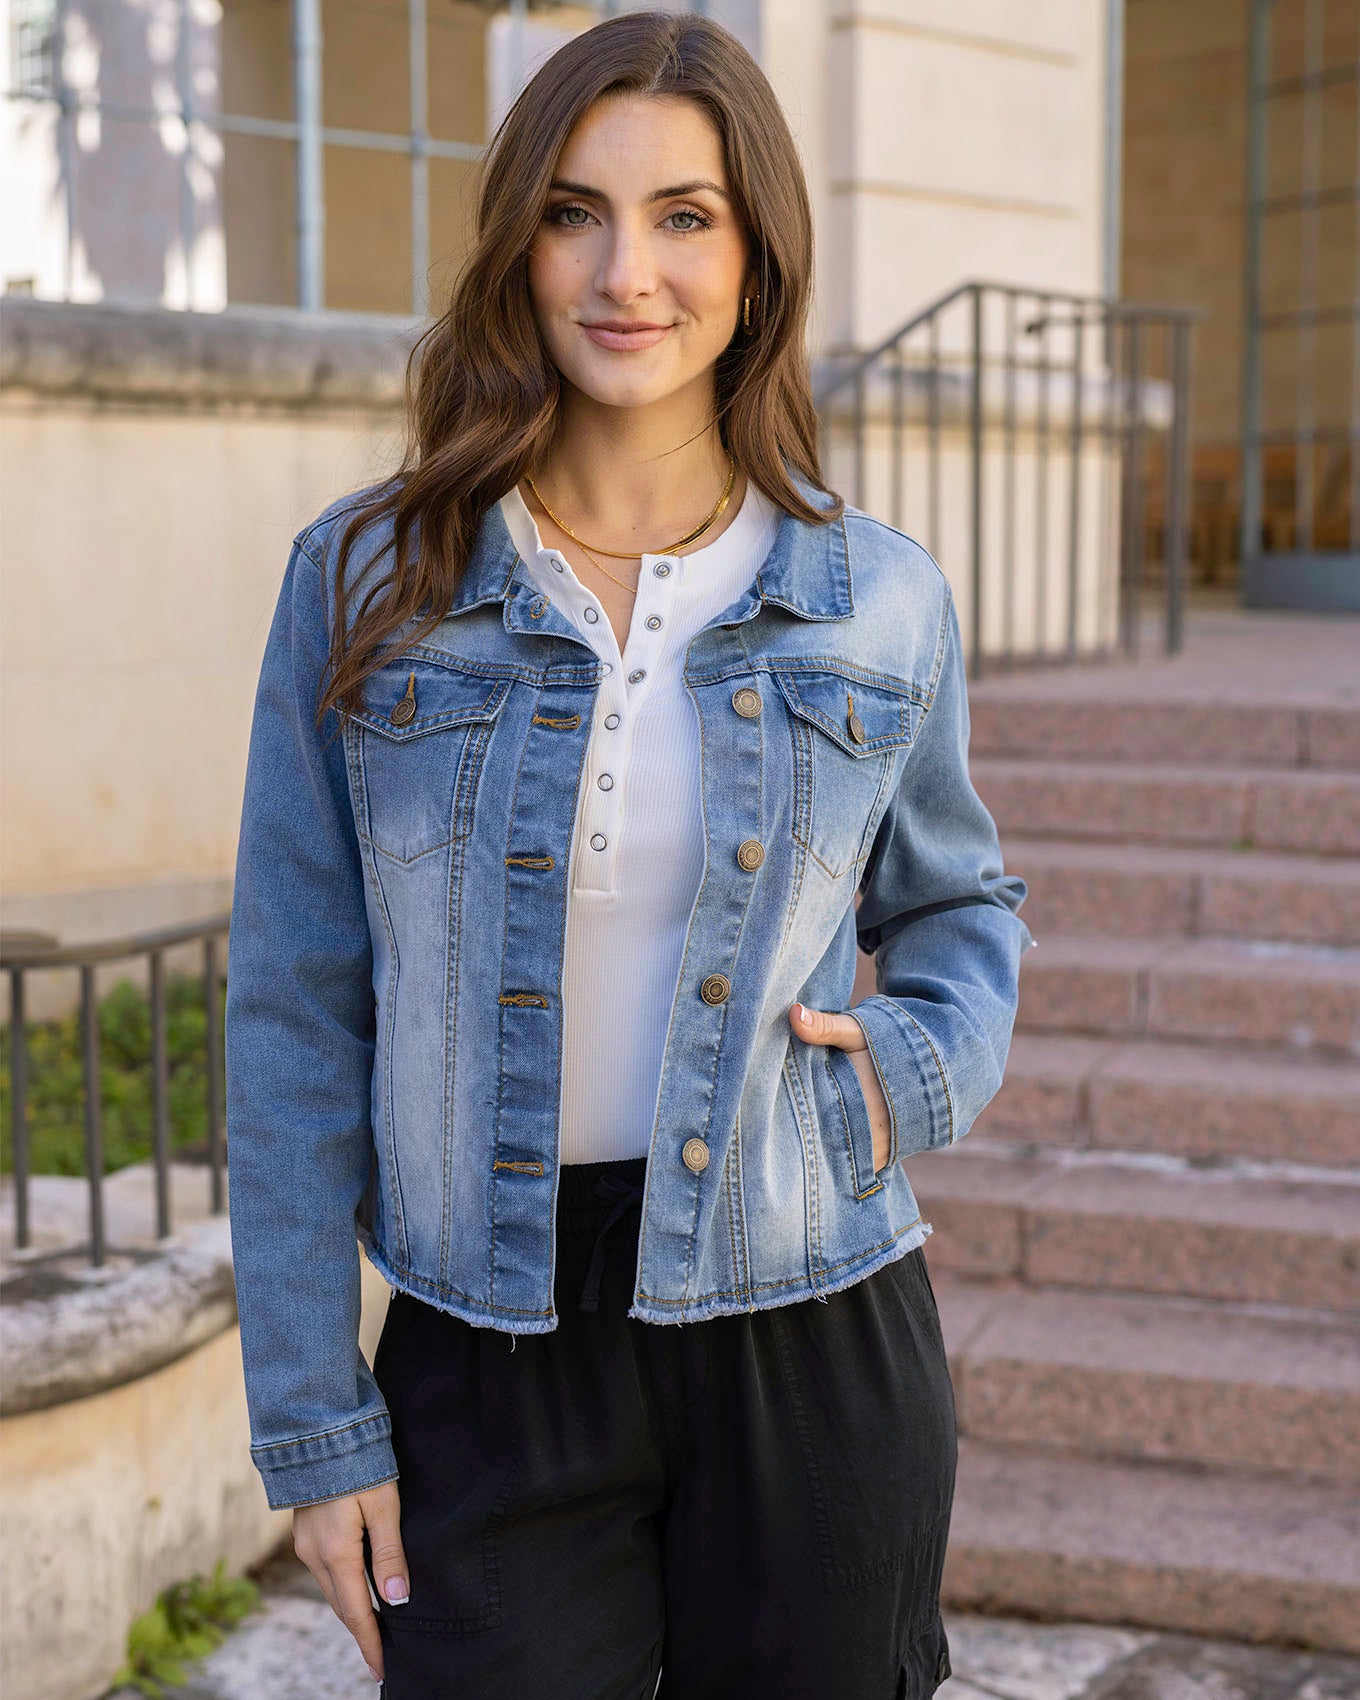 How to Make a Pearl Denim Jacket - EMILY BELLOMA